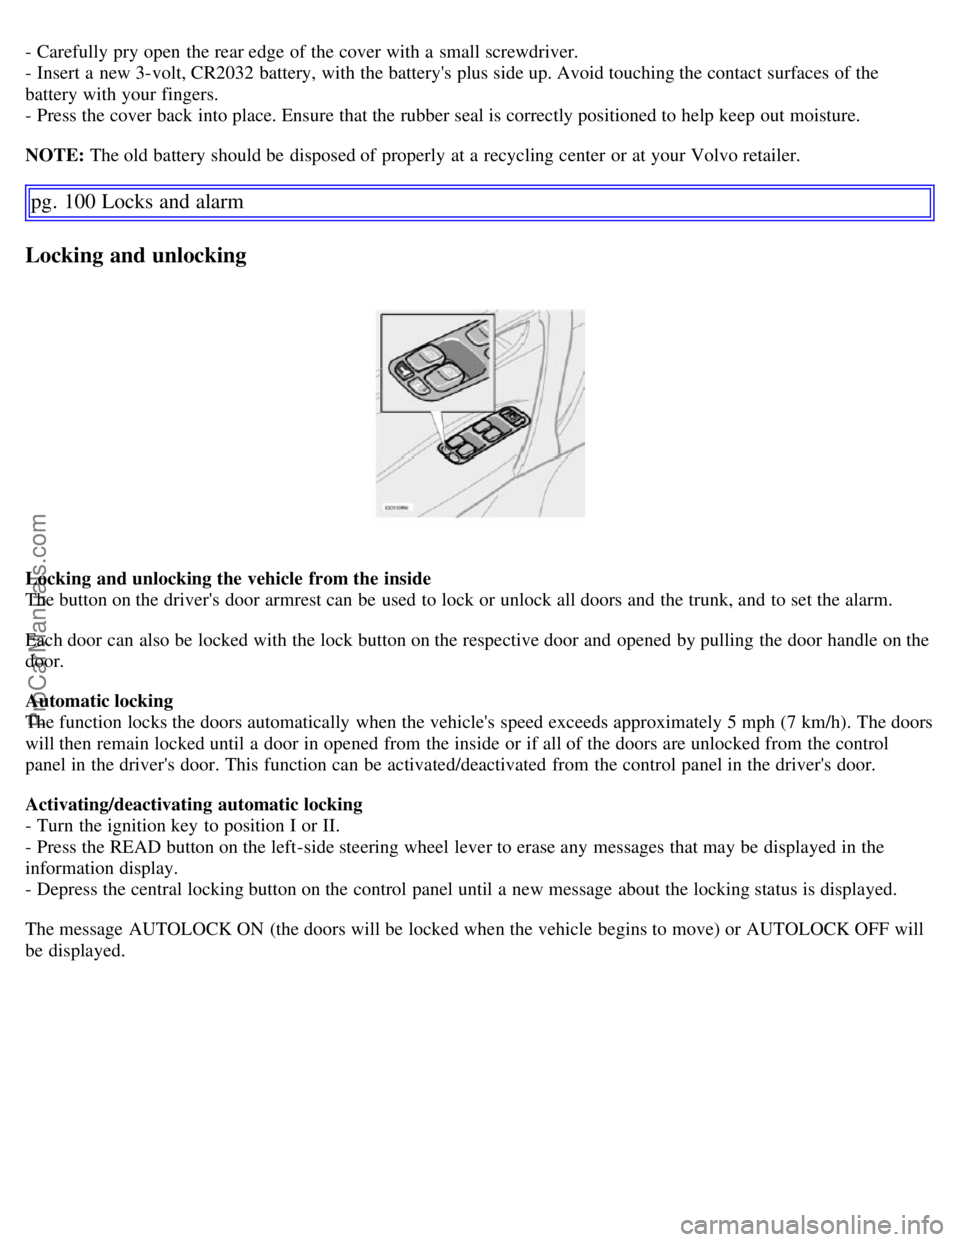 VOLVO S60 2007  Owners Manual - Carefully pry open  the rear edge of the cover with a  small screwdriver.
- Insert a  new 3-volt, CR2032 battery, with the batterys plus side up. Avoid touching the contact surfaces of the
battery 